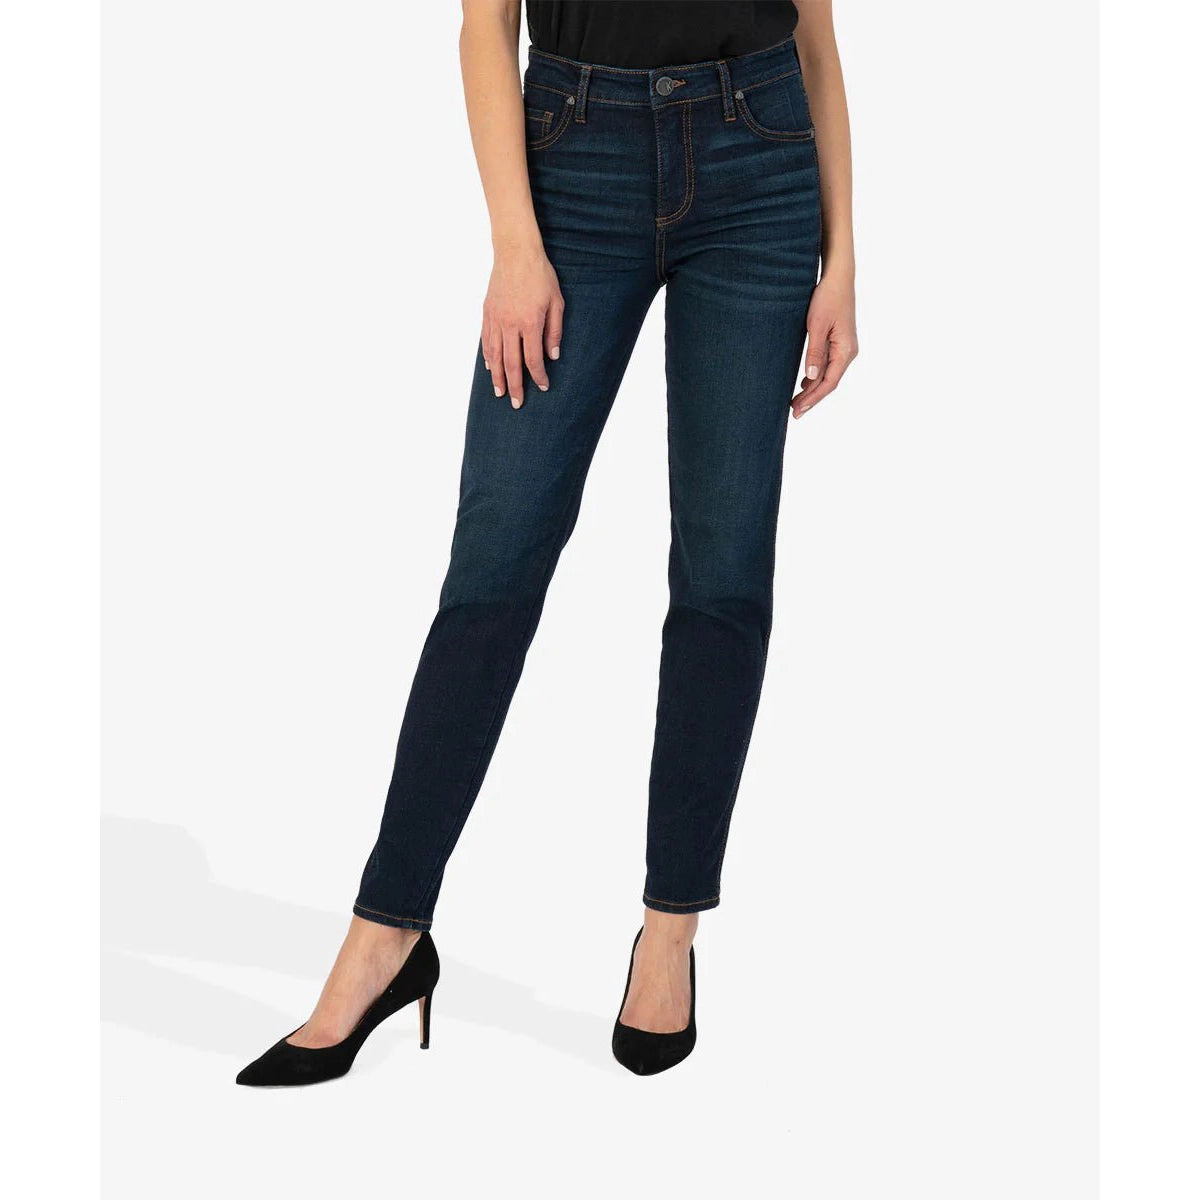 Kut Diana High Rise Relaxed Fit Skinny Jeans - Happening Wash